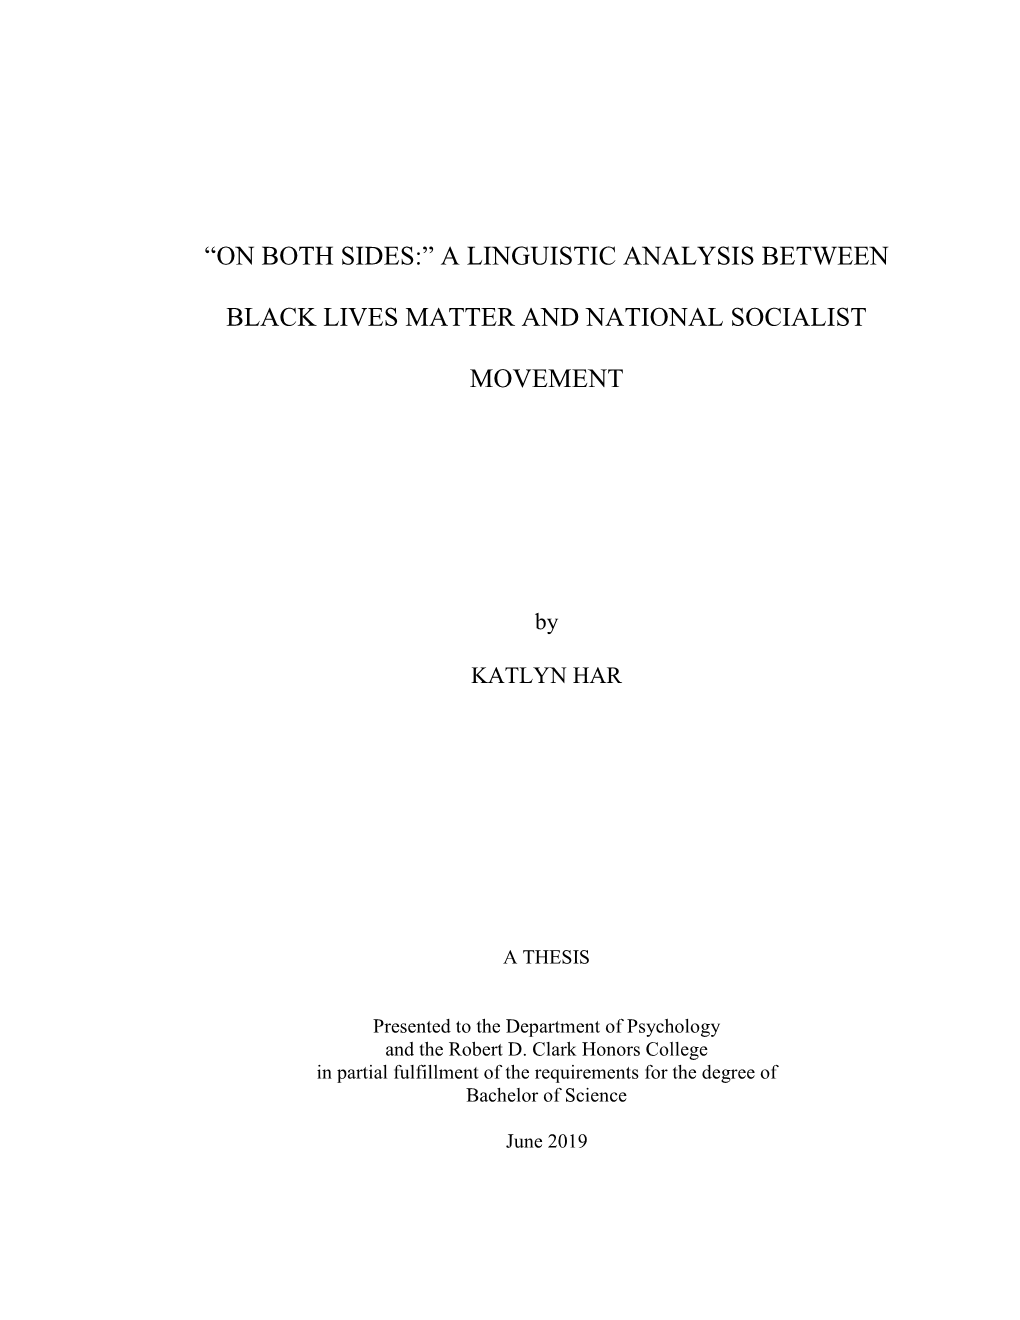 On Both Sides: a Linguistic Analysis Between Black Lives Matter And